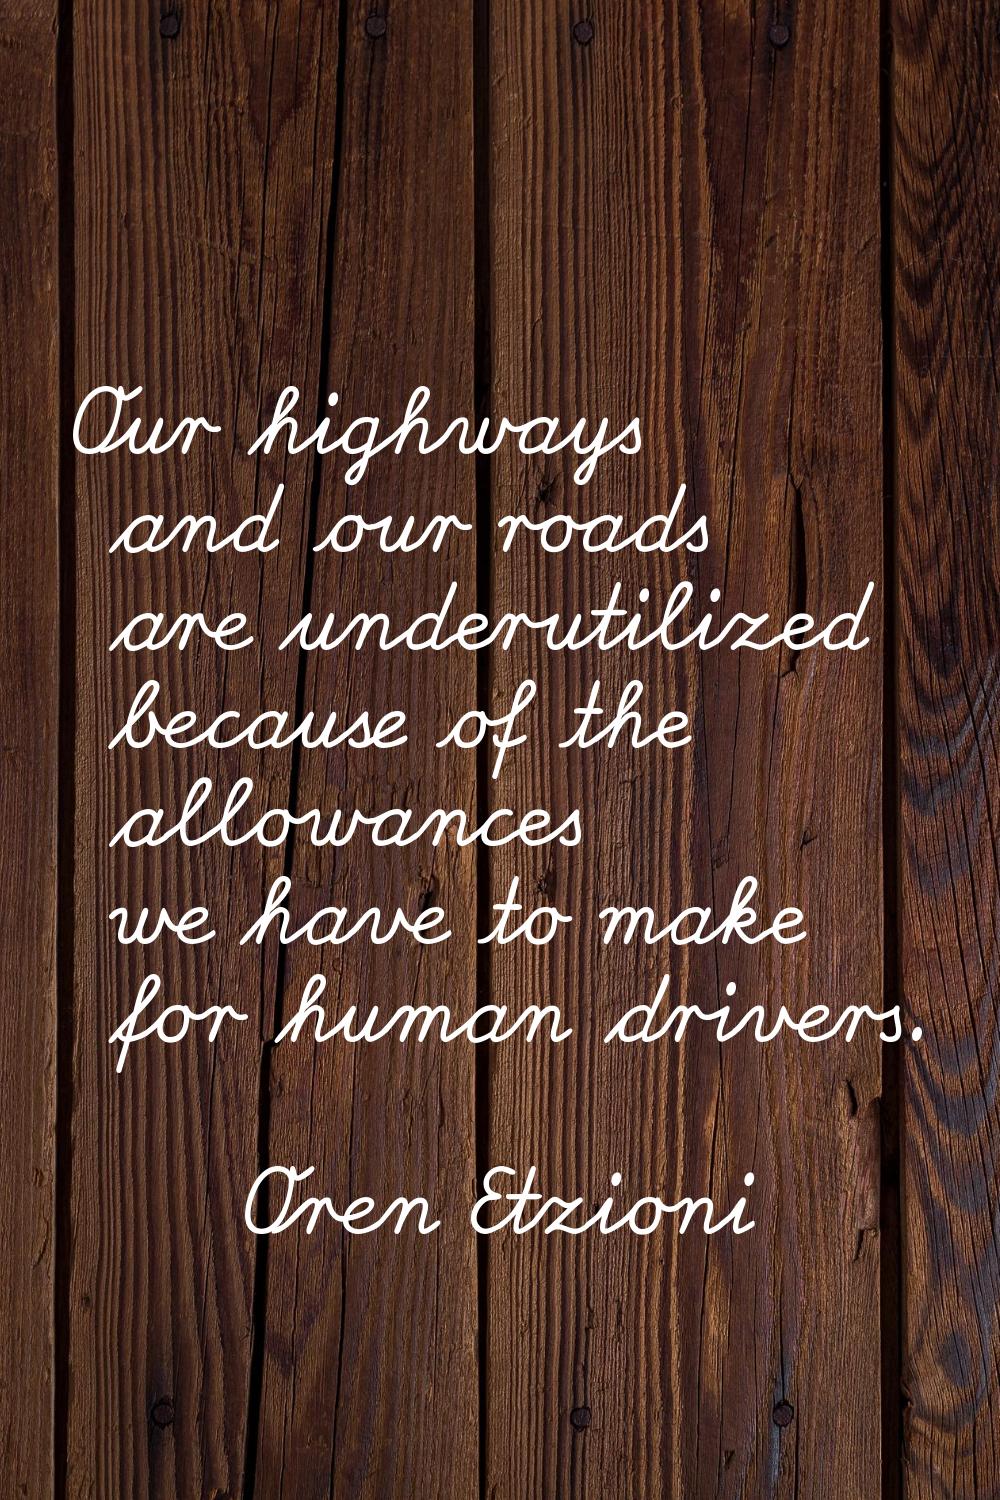 Our highways and our roads are underutilized because of the allowances we have to make for human dr